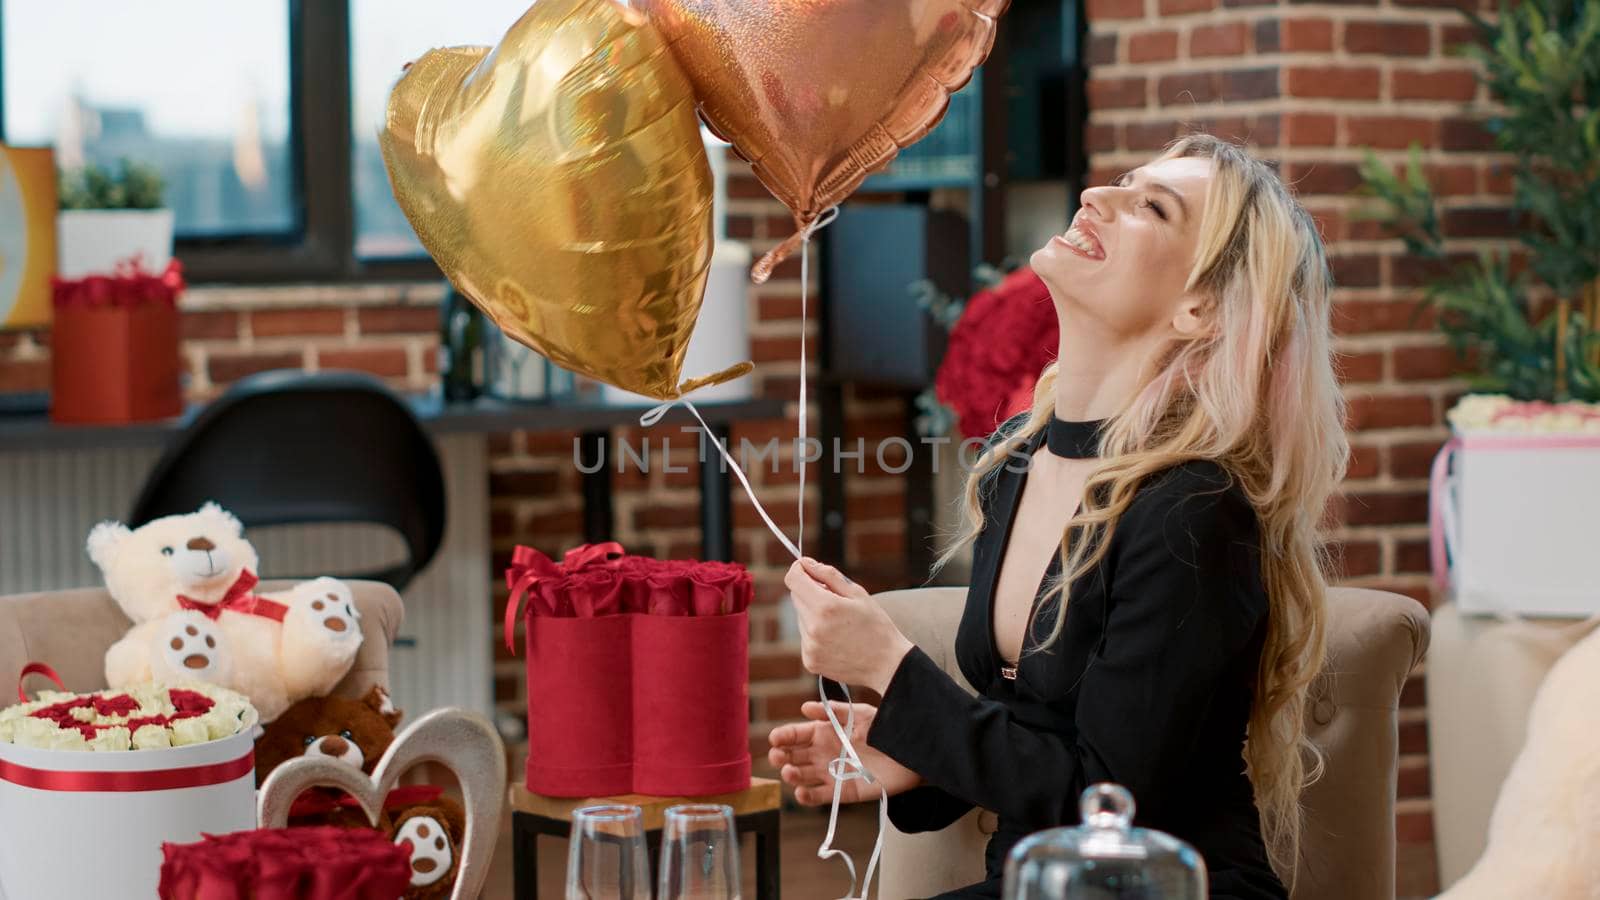 Attractive smiling woman enjoying romantic surprise with balloons by DCStudio